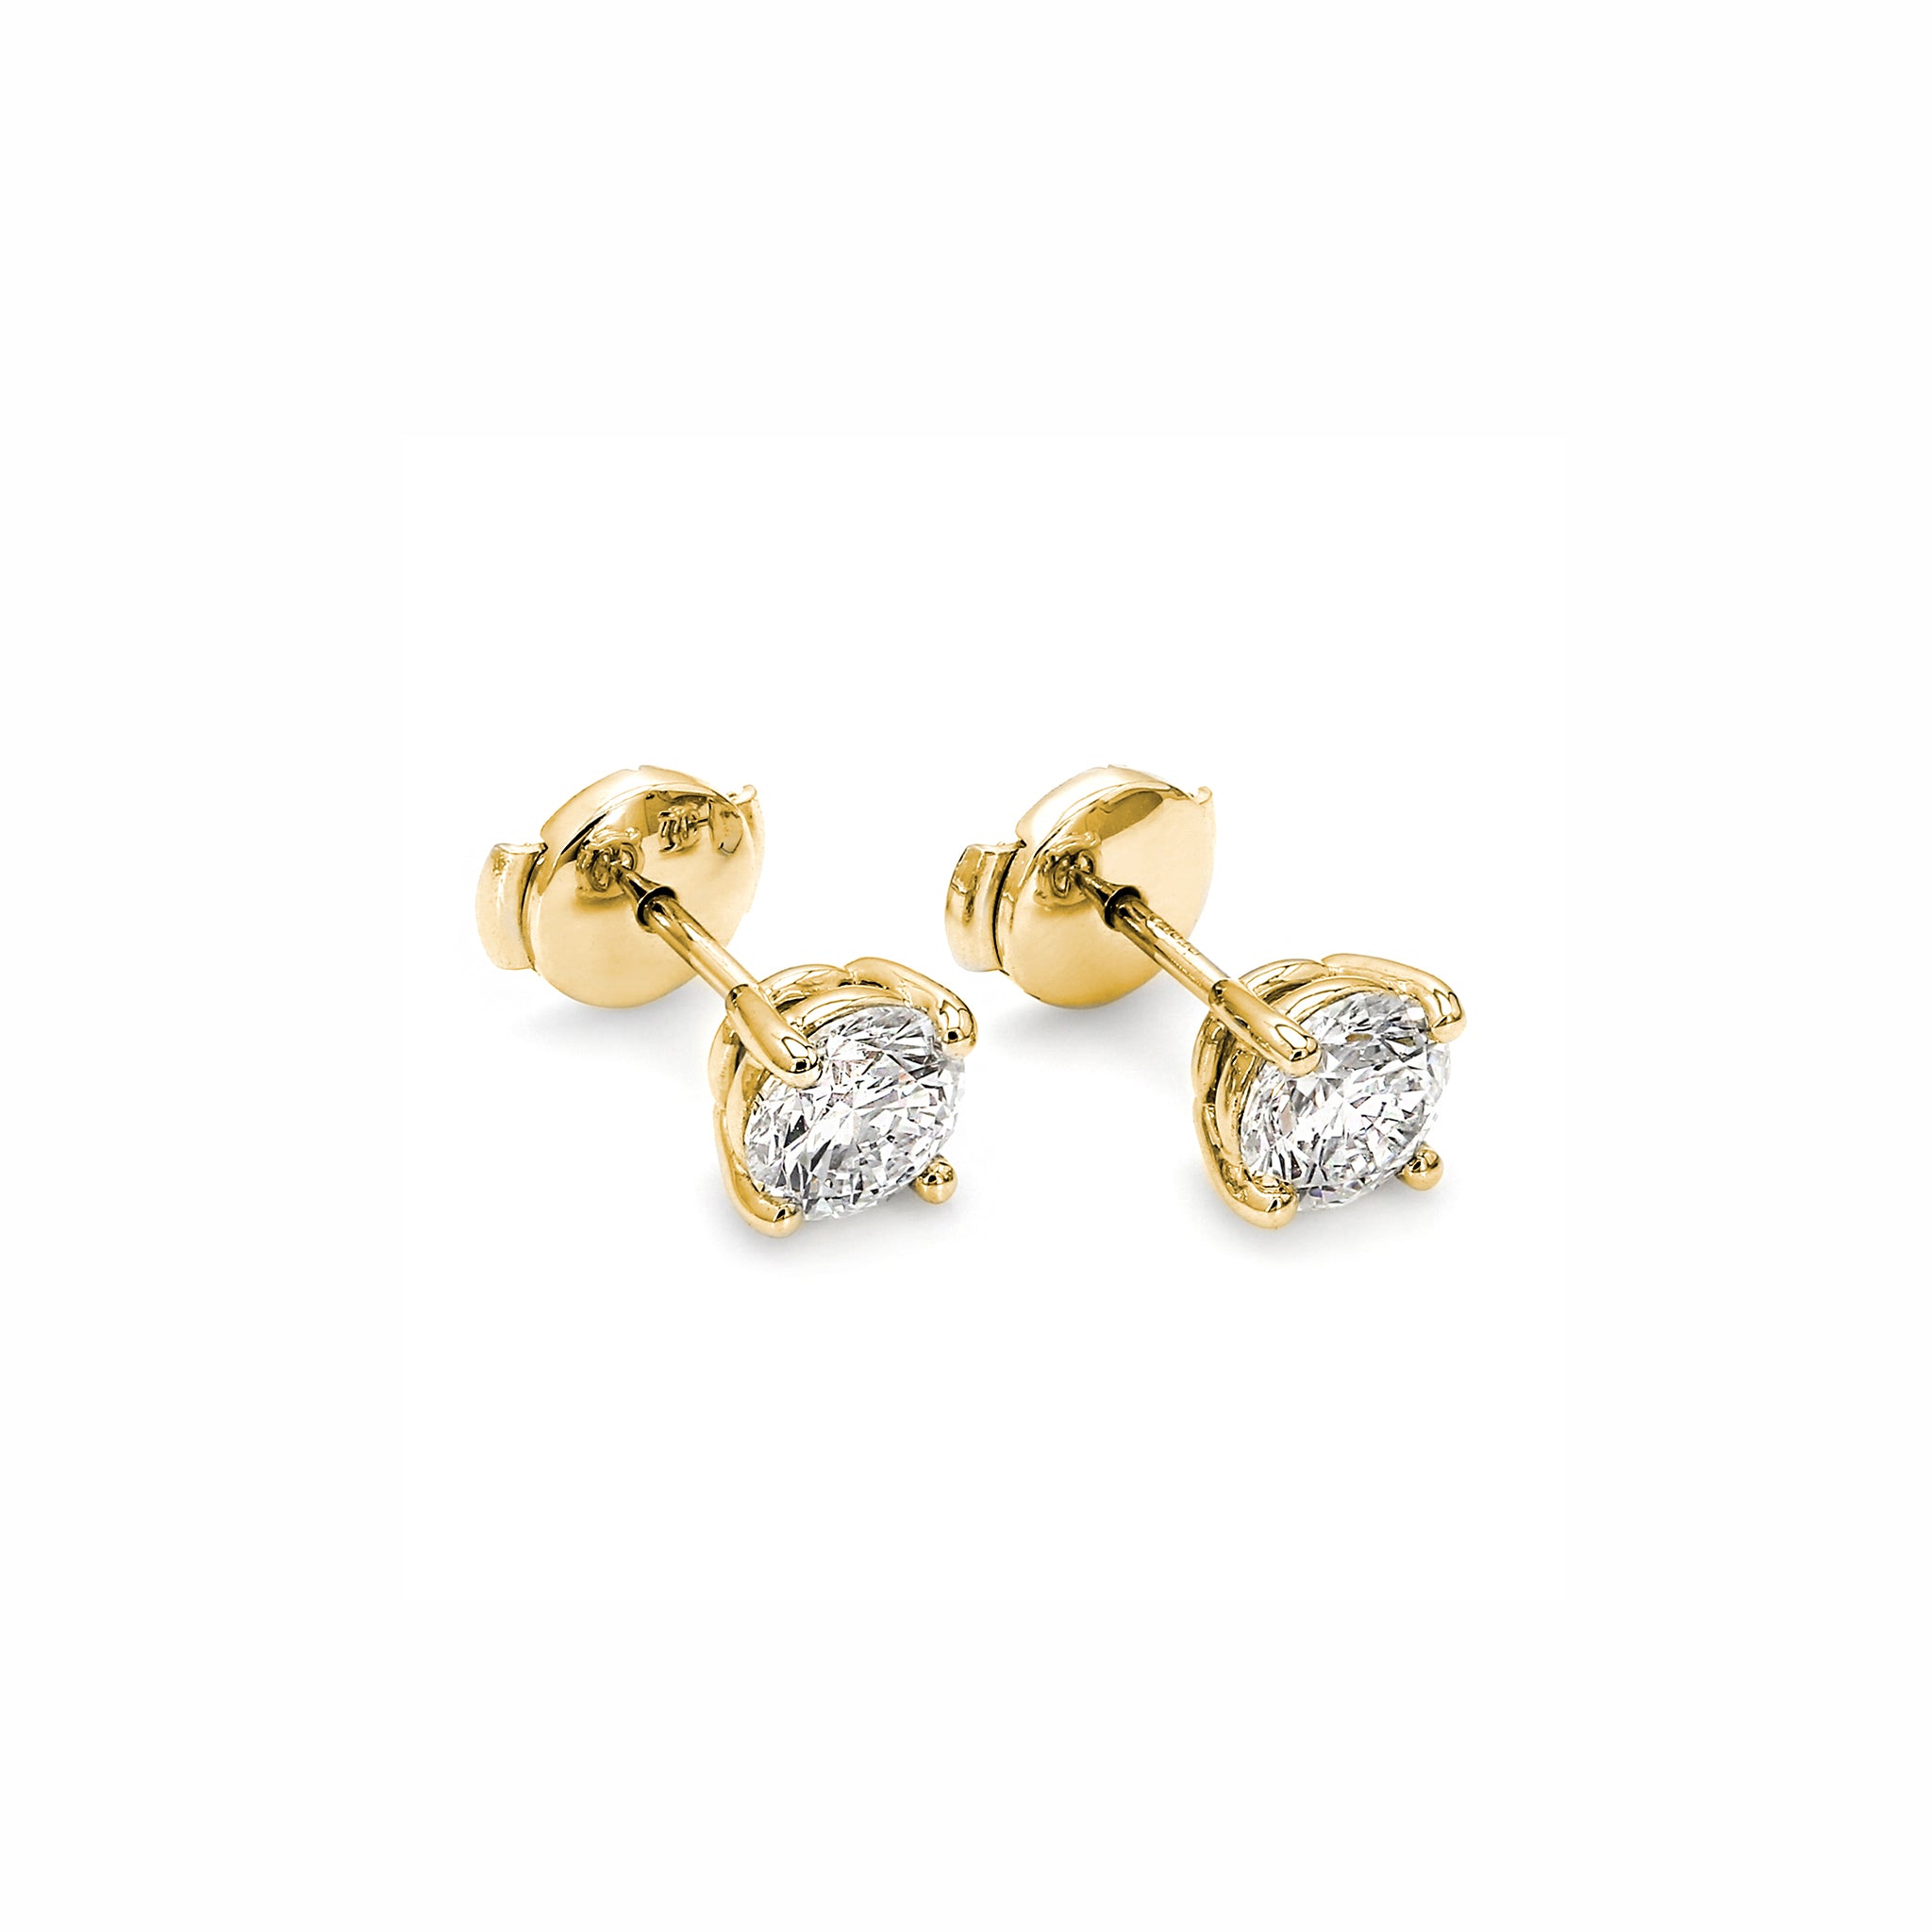 Shimansky - Classic Diamond Solitaire Earrings 1.00ct in 18K Yellow Gold